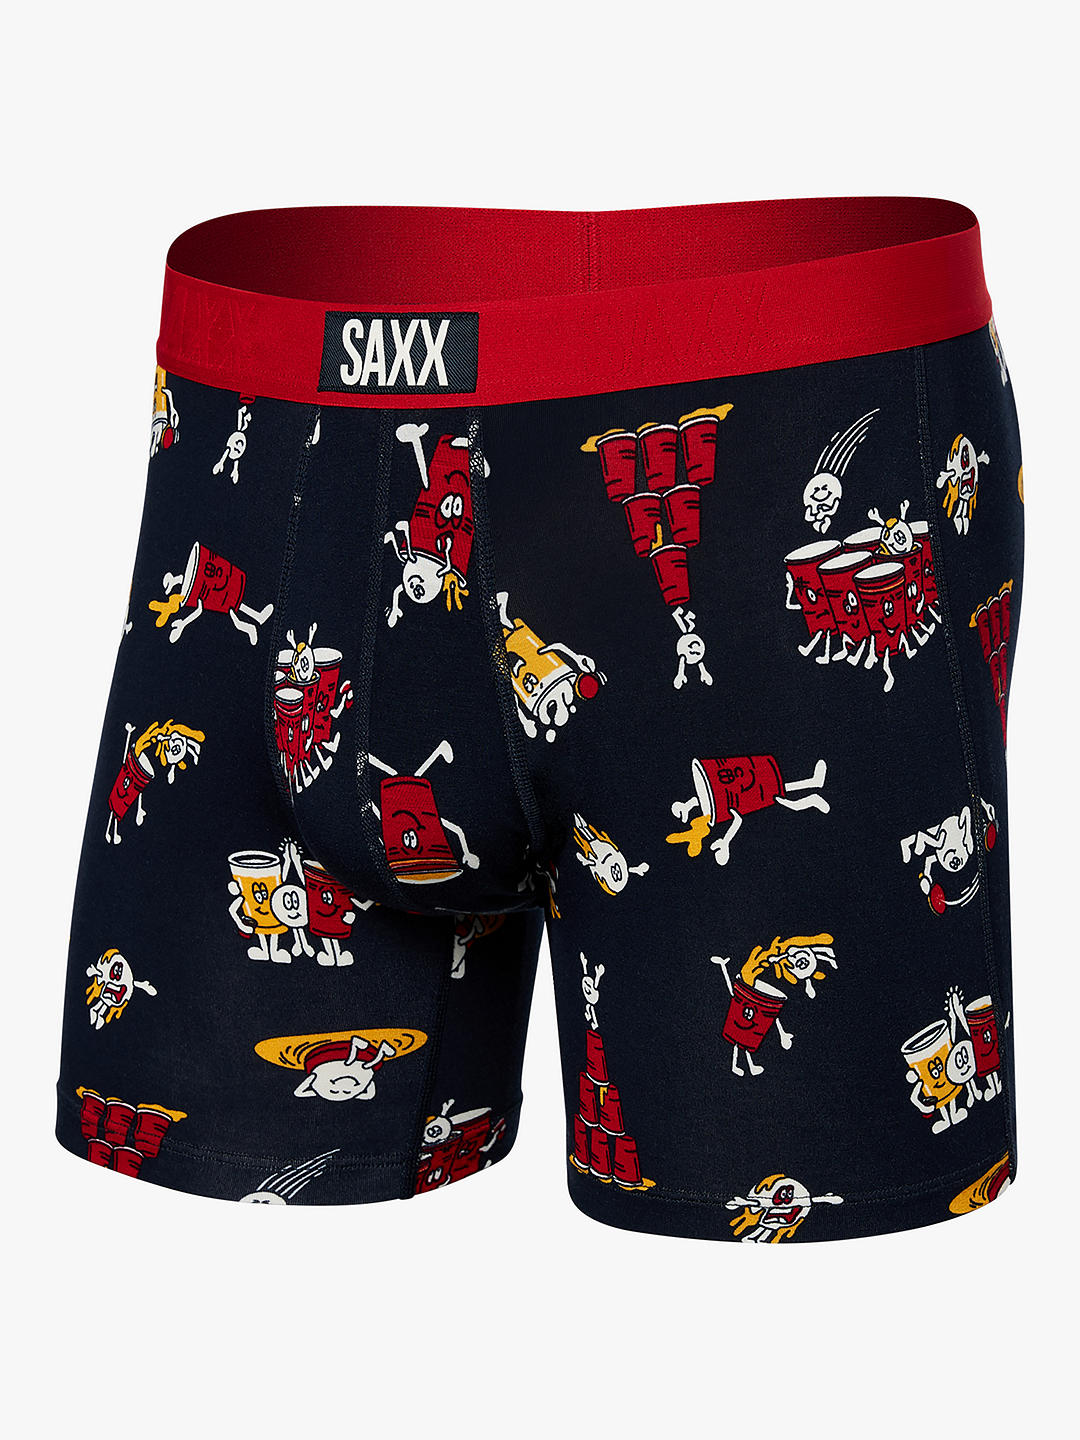 SAXX Slim Fit Vibe Party Trunks, Multi